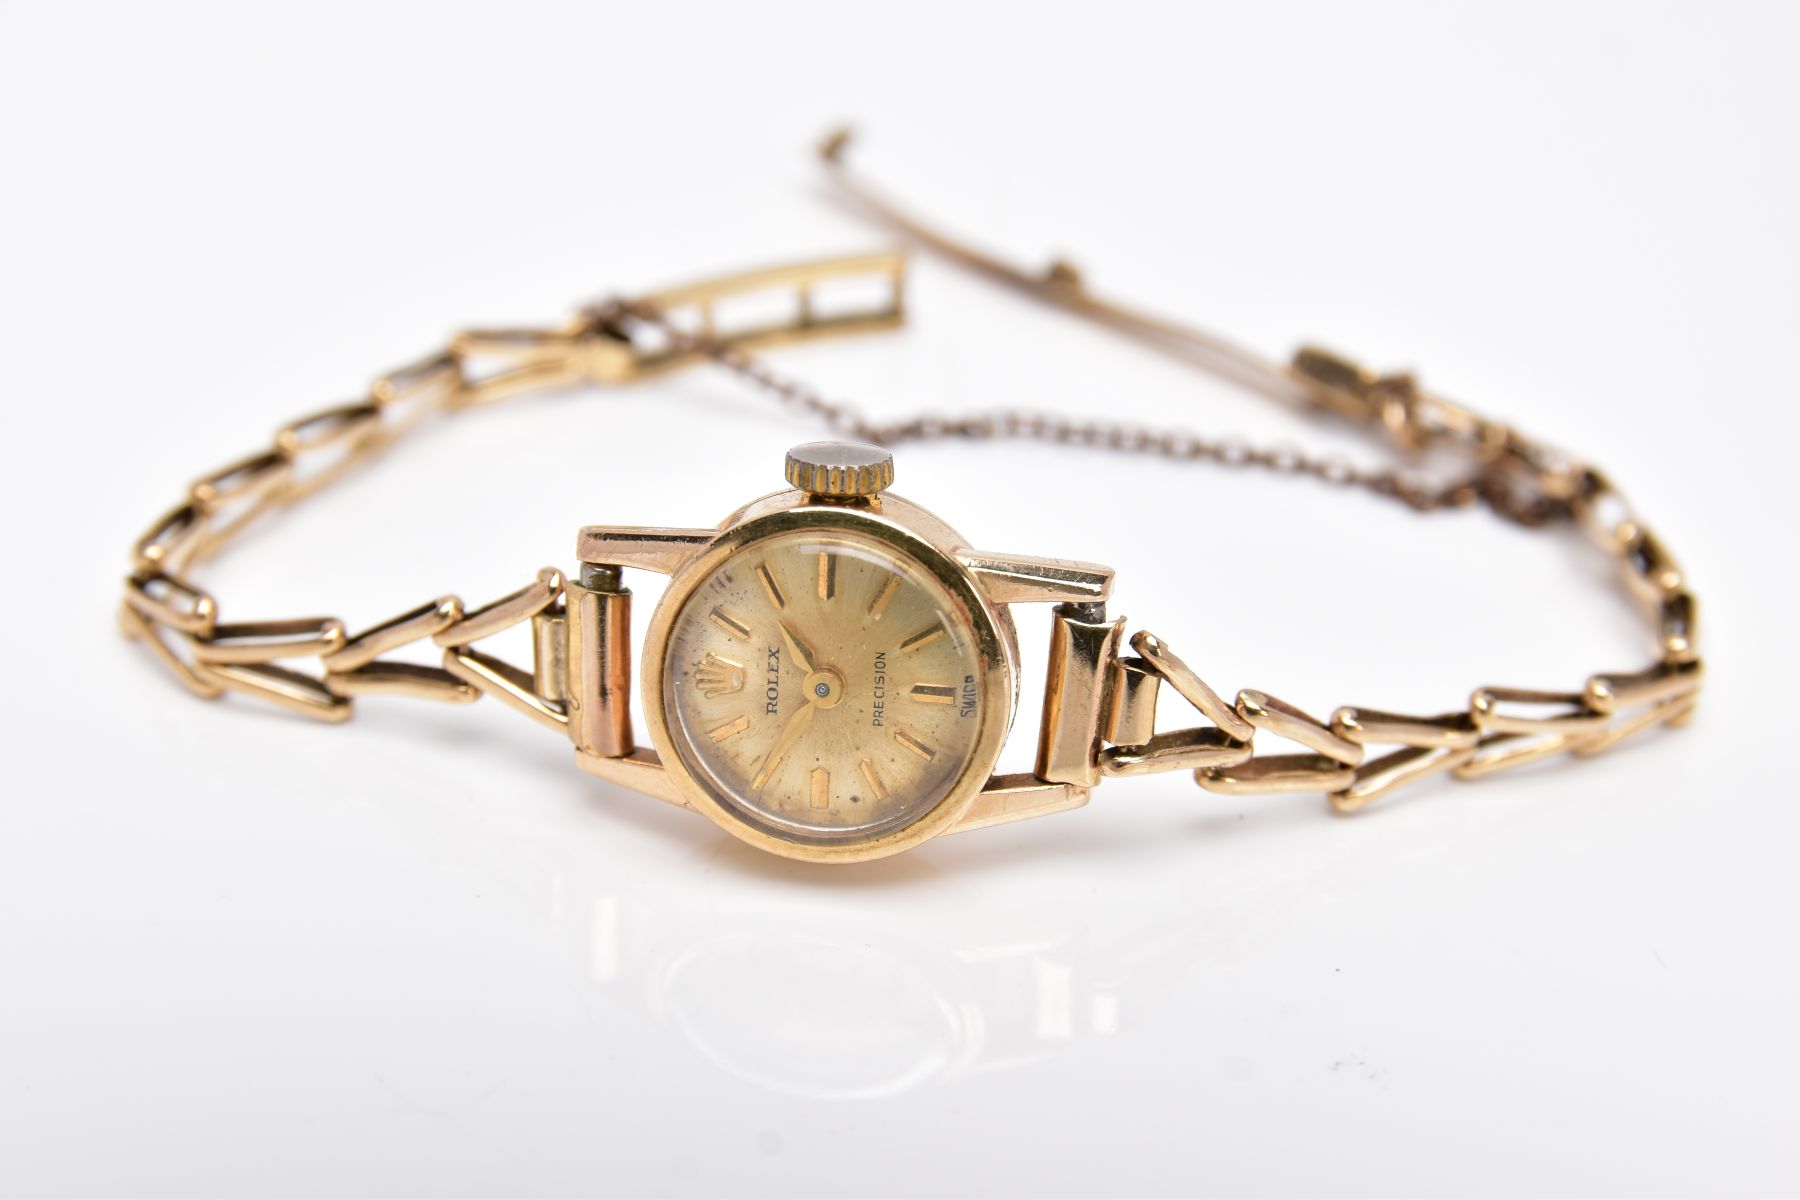 A LADIES 9CT GOLD ROLEX PRECISION WRISTWATCH, round case measuring approximately 16mm in diameter, - Image 4 of 6